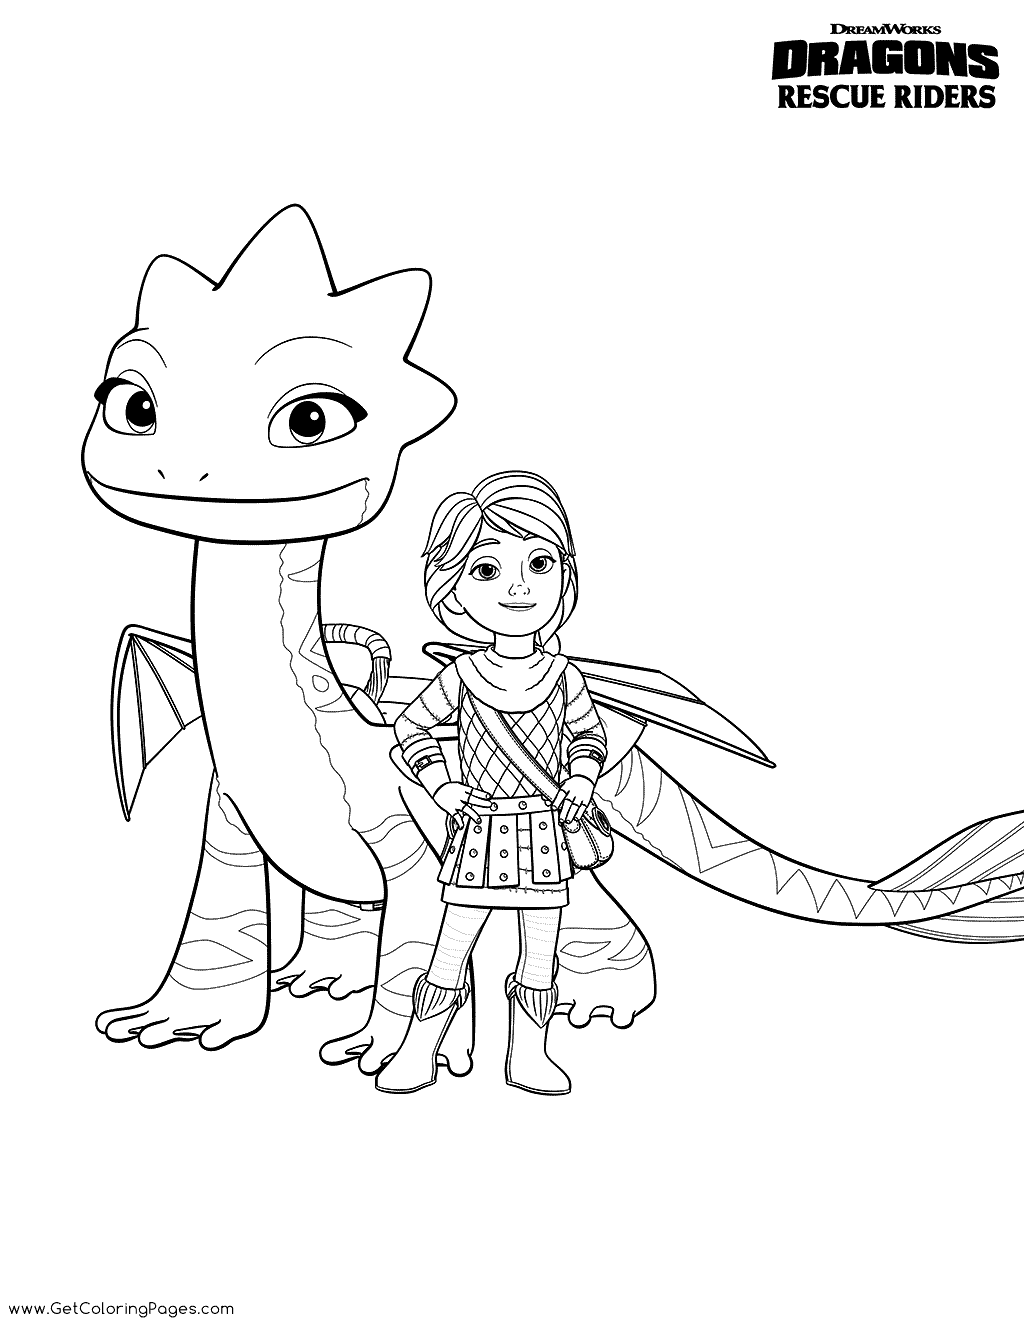 Dragons Rescue Riders Coloring Pages Leyla and Summer - Get Coloring Pages